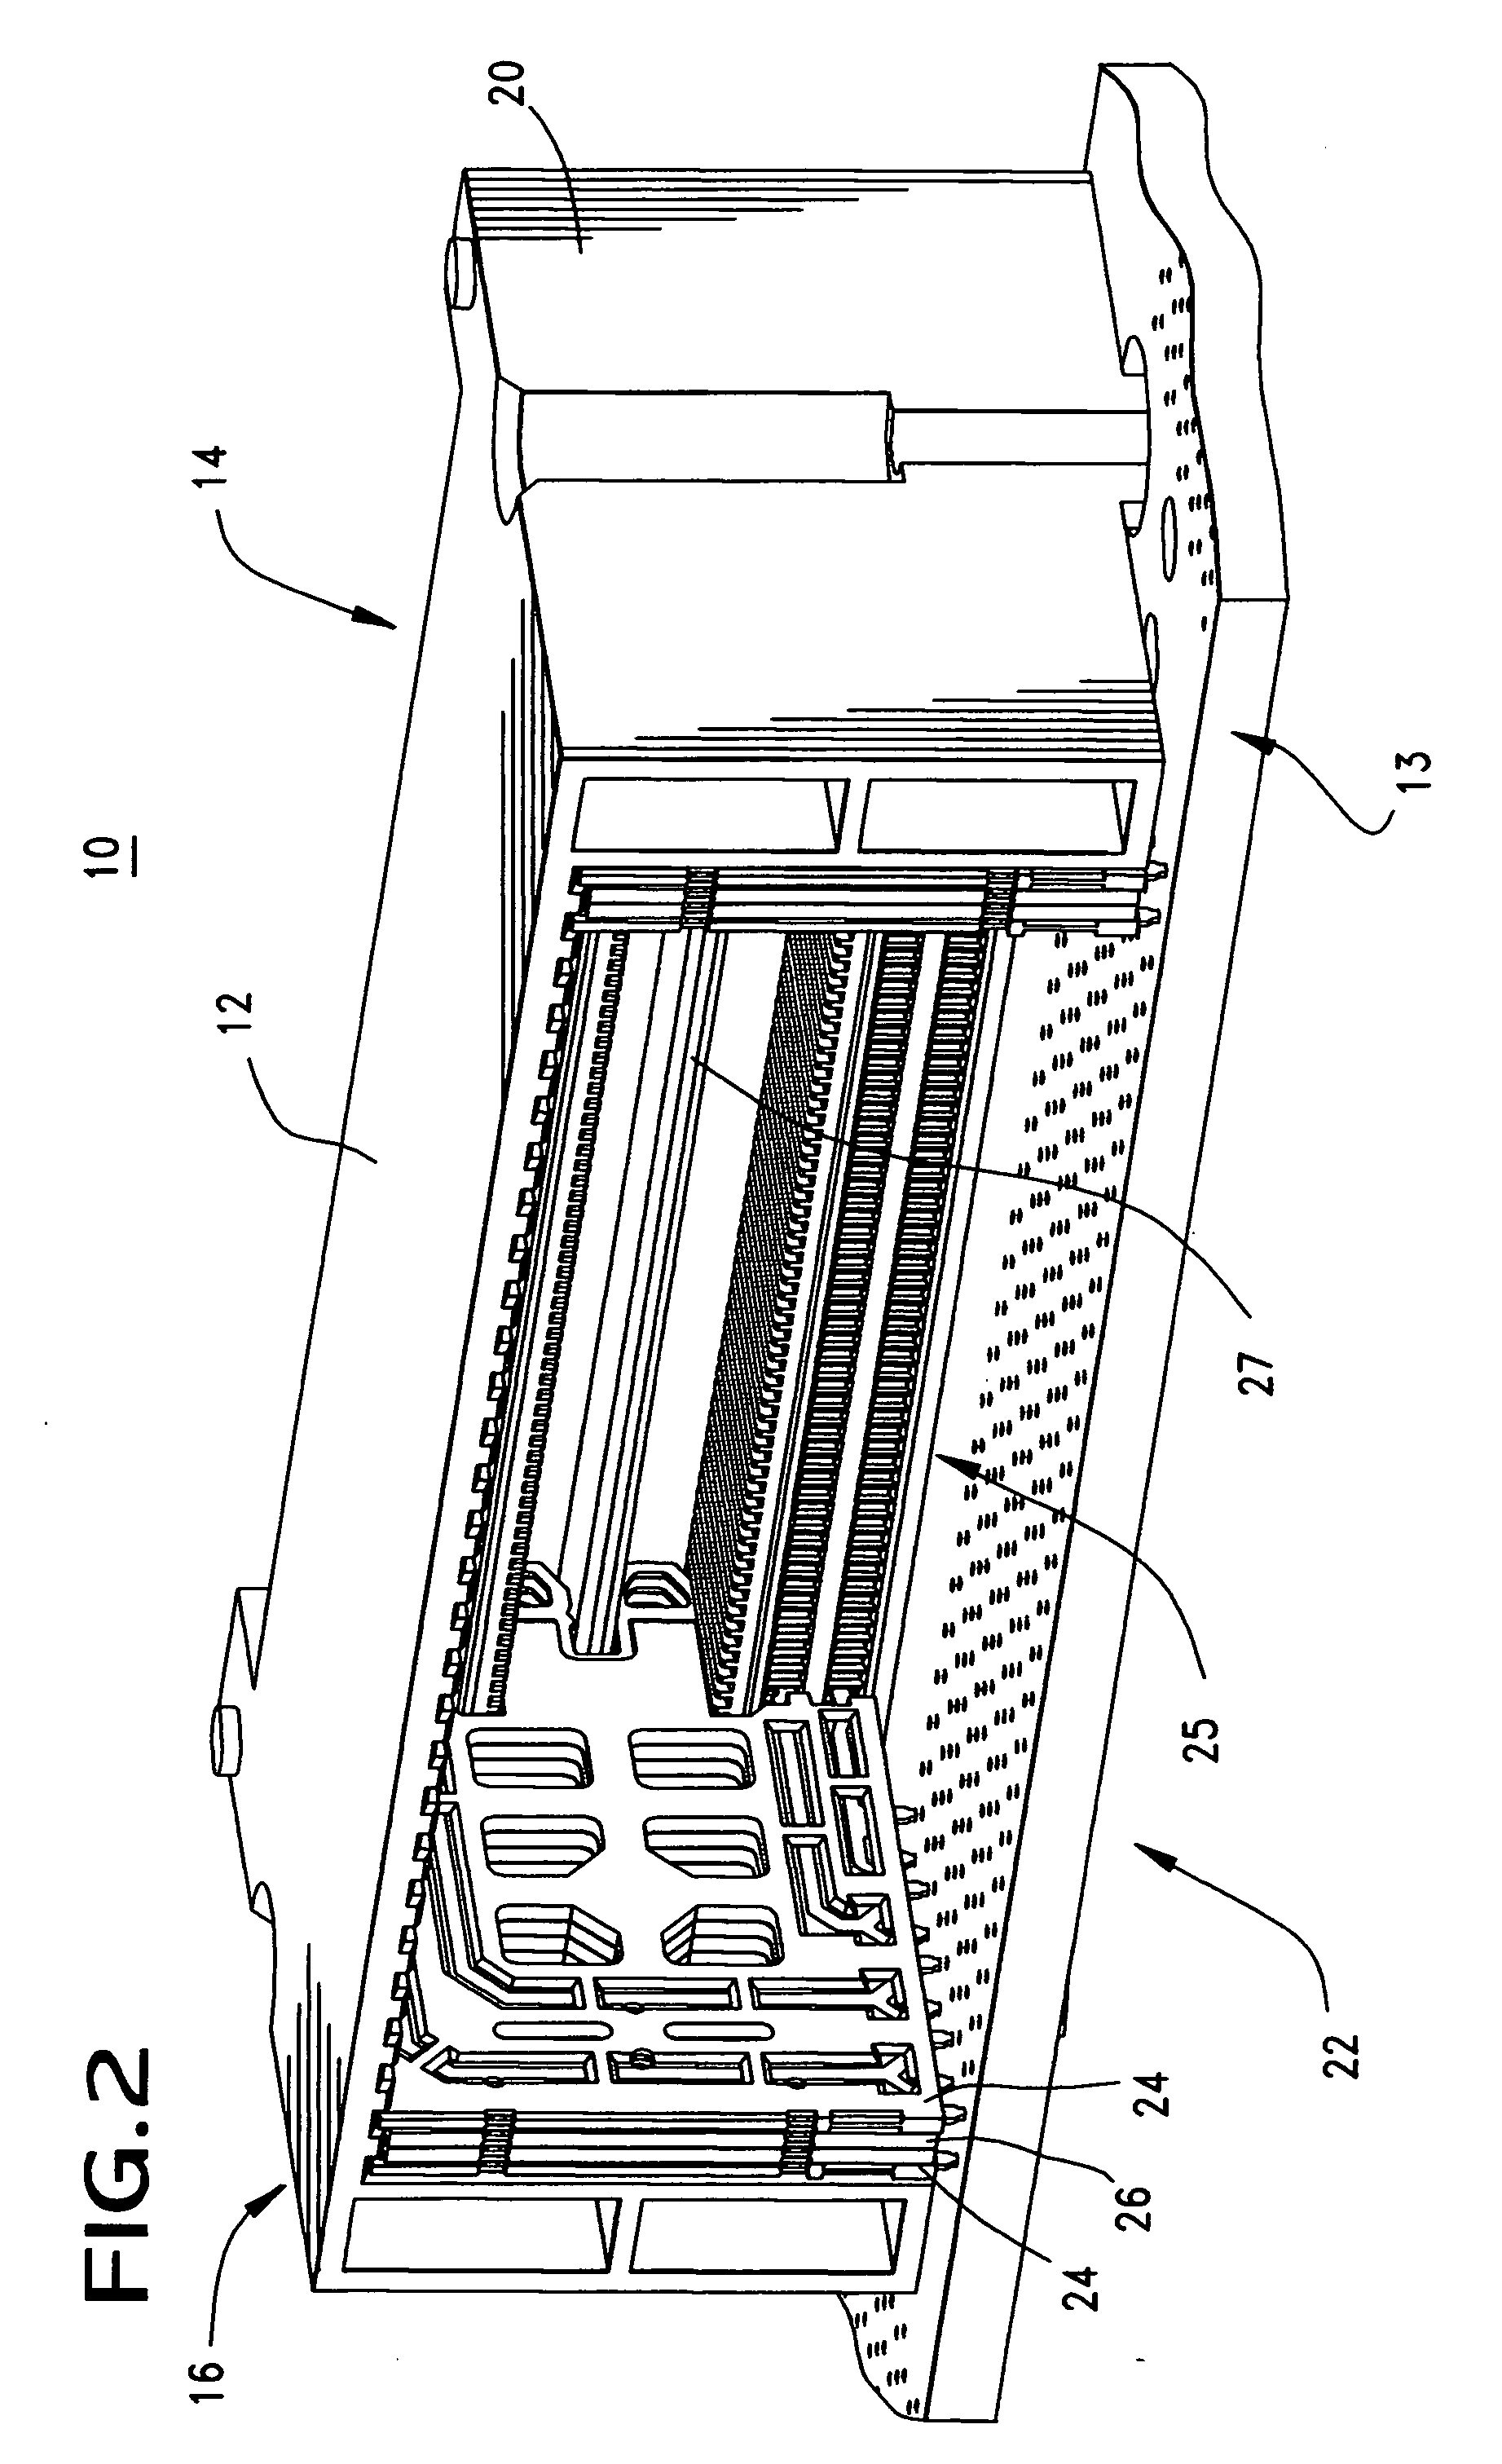 Differential signal connector with wafer-style construction